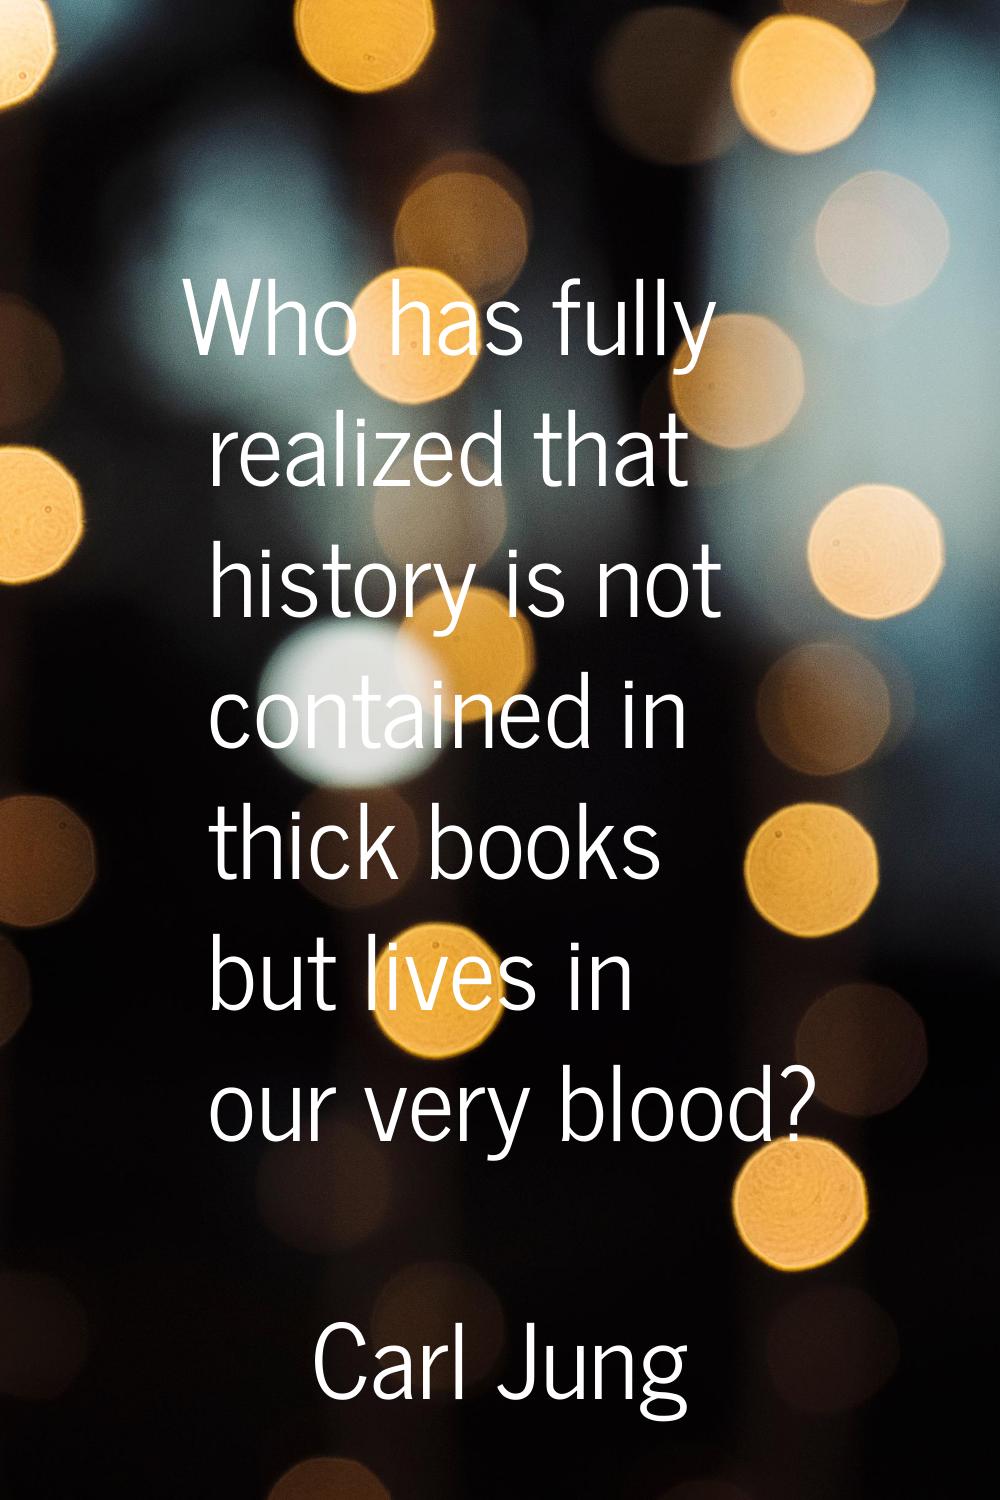 Who has fully realized that history is not contained in thick books but lives in our very blood?